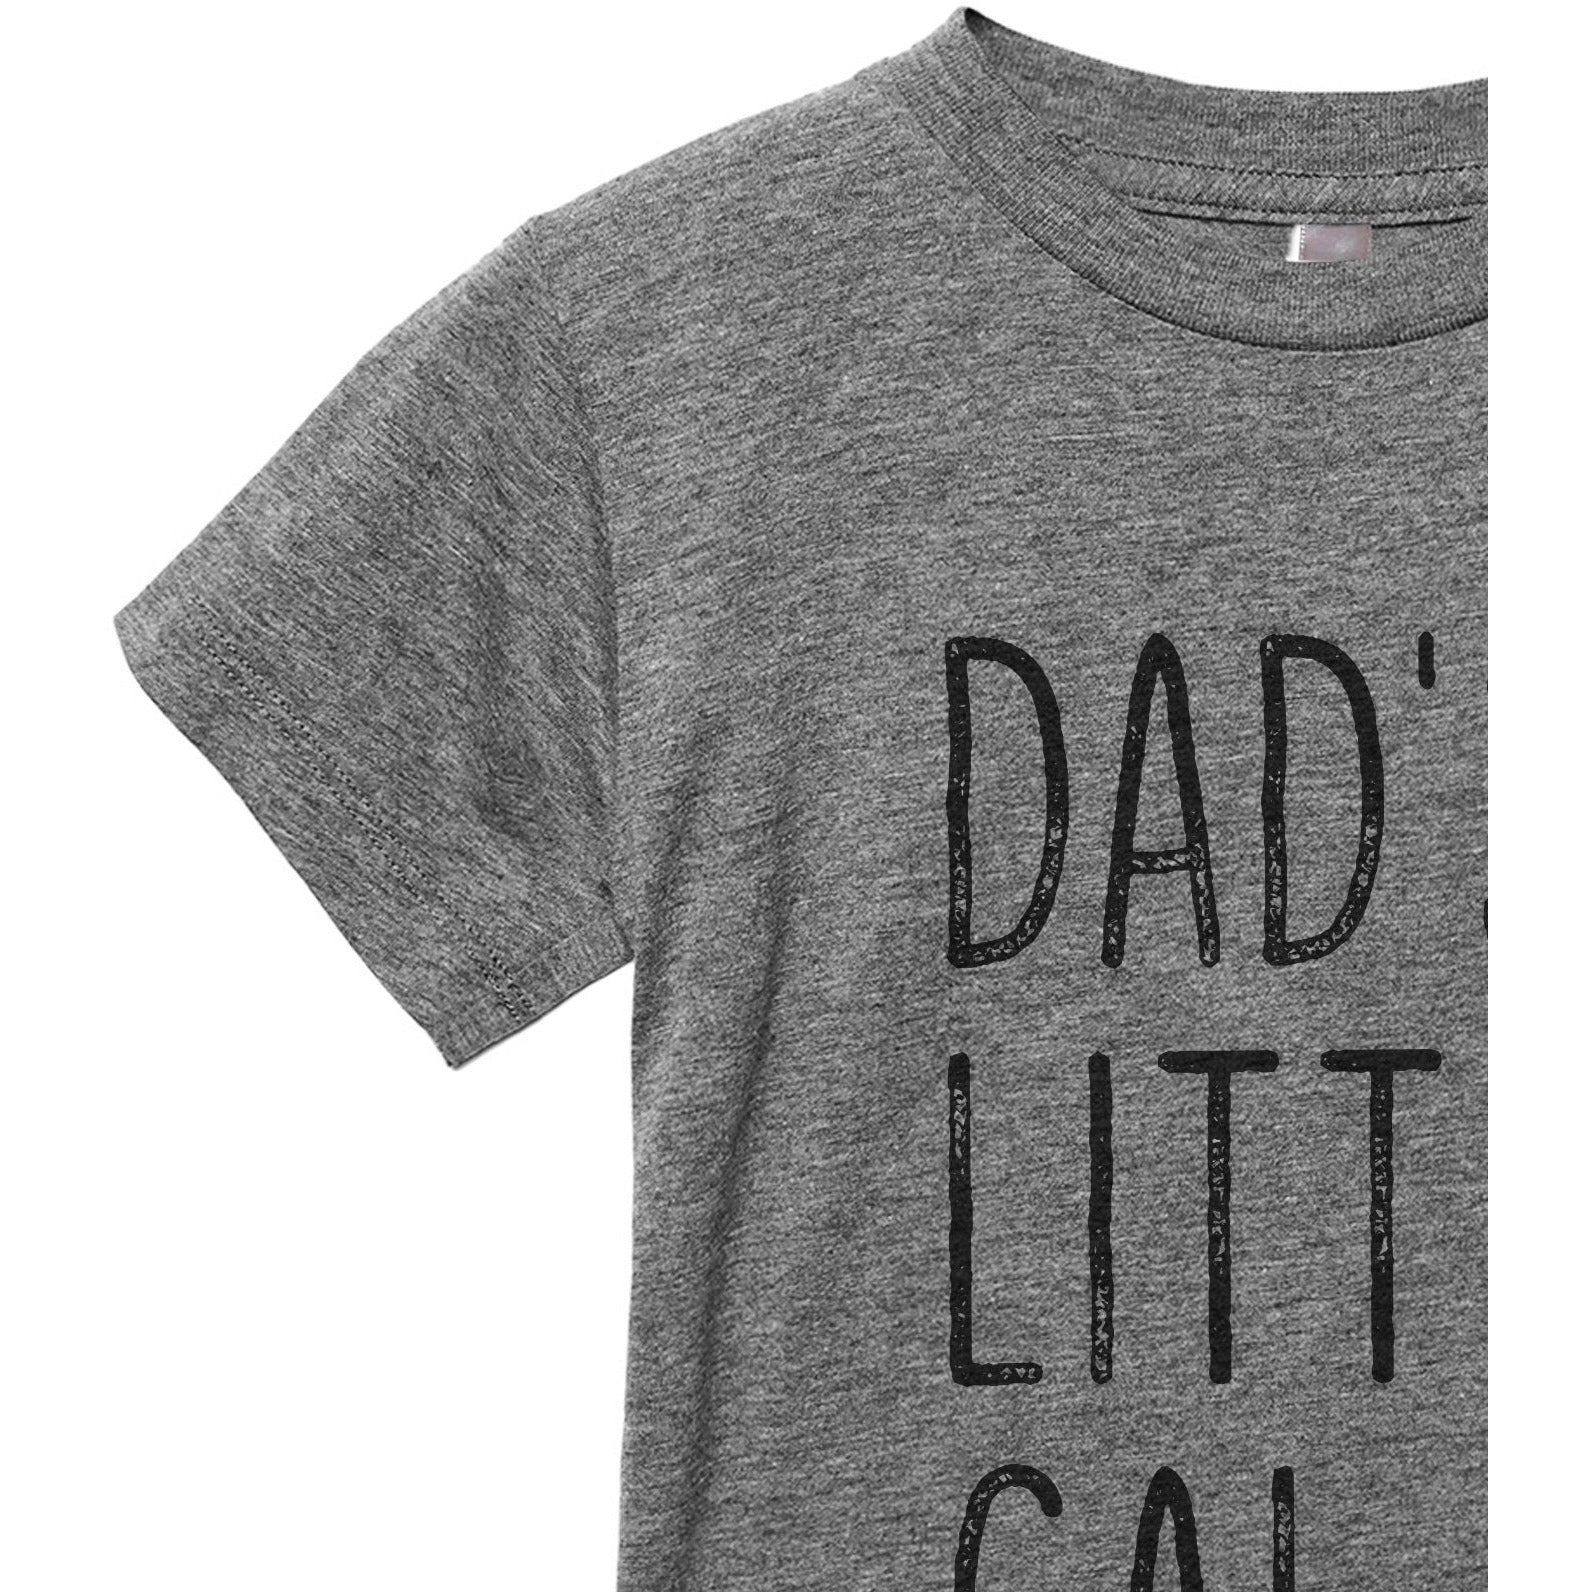 Dad's Little Gal Toddler's Go-To Crewneck Tee Charcoal Close Up Sleeves Collar Details
